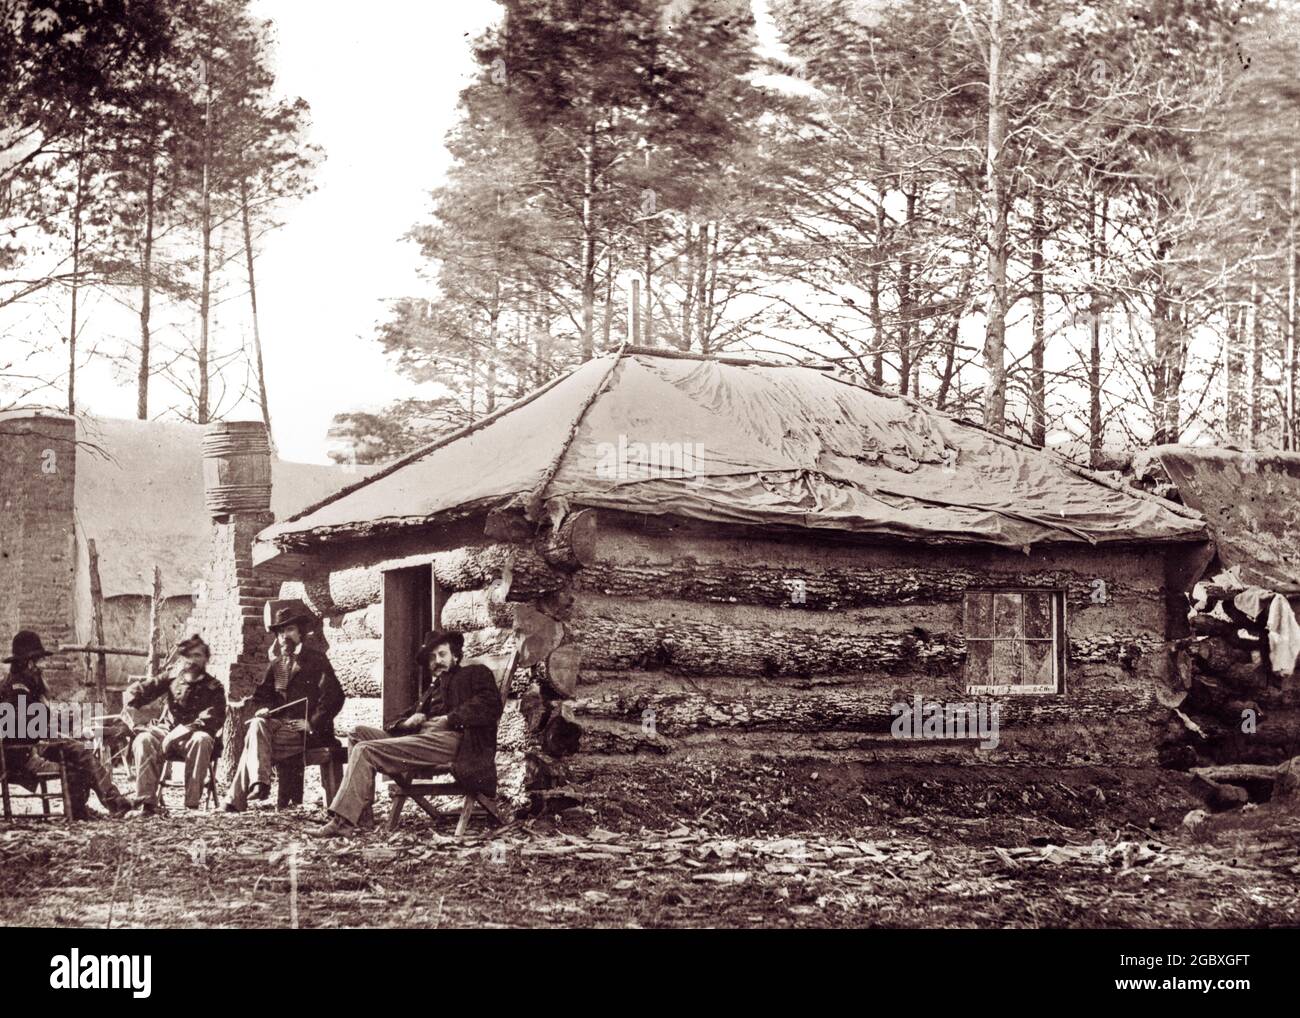 1800s 1860s OFFICERS LOG HUT WITH CANVAS ROOF AT UNION CAMP AMERICAN CIVIL WAR  - h8911 SPL001 HARS EXTERIOR HUT UNIFORMS REAL ESTATE CONNECTION STRUCTURES 1860s EDIFICE OFFICERS COOPERATION TOGETHERNESS AMERICAN CIVIL WAR BATTLES BLACK AND WHITE CIVIL WAR CONFLICTS OLD FASHIONED Stock Photo